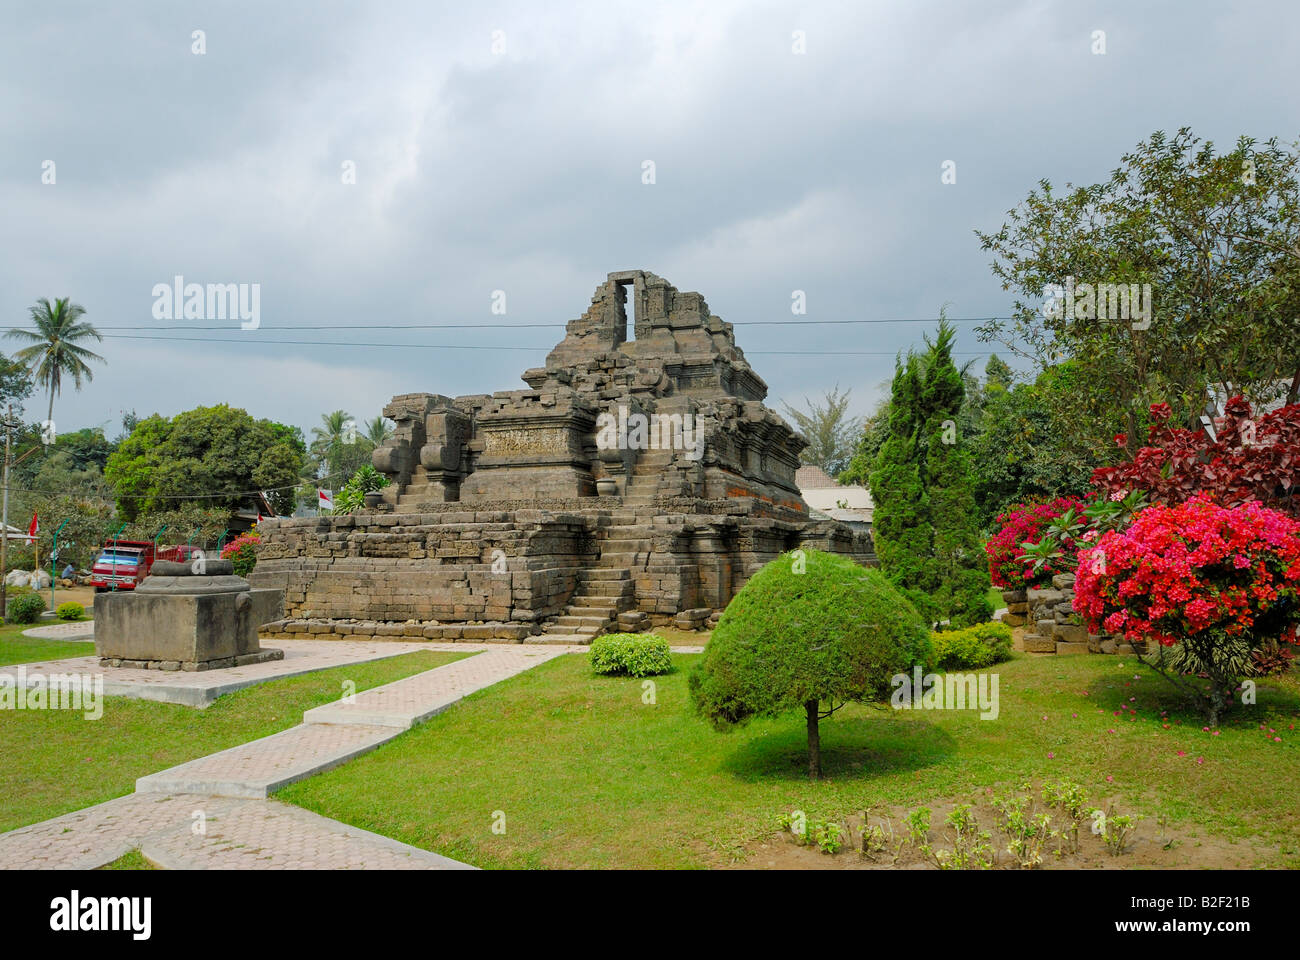 Candi Jago temple with influence of hinduism and javanism 13 century, JAVA, INDONESIA, SOUTHEAST ASIA Stock Photo